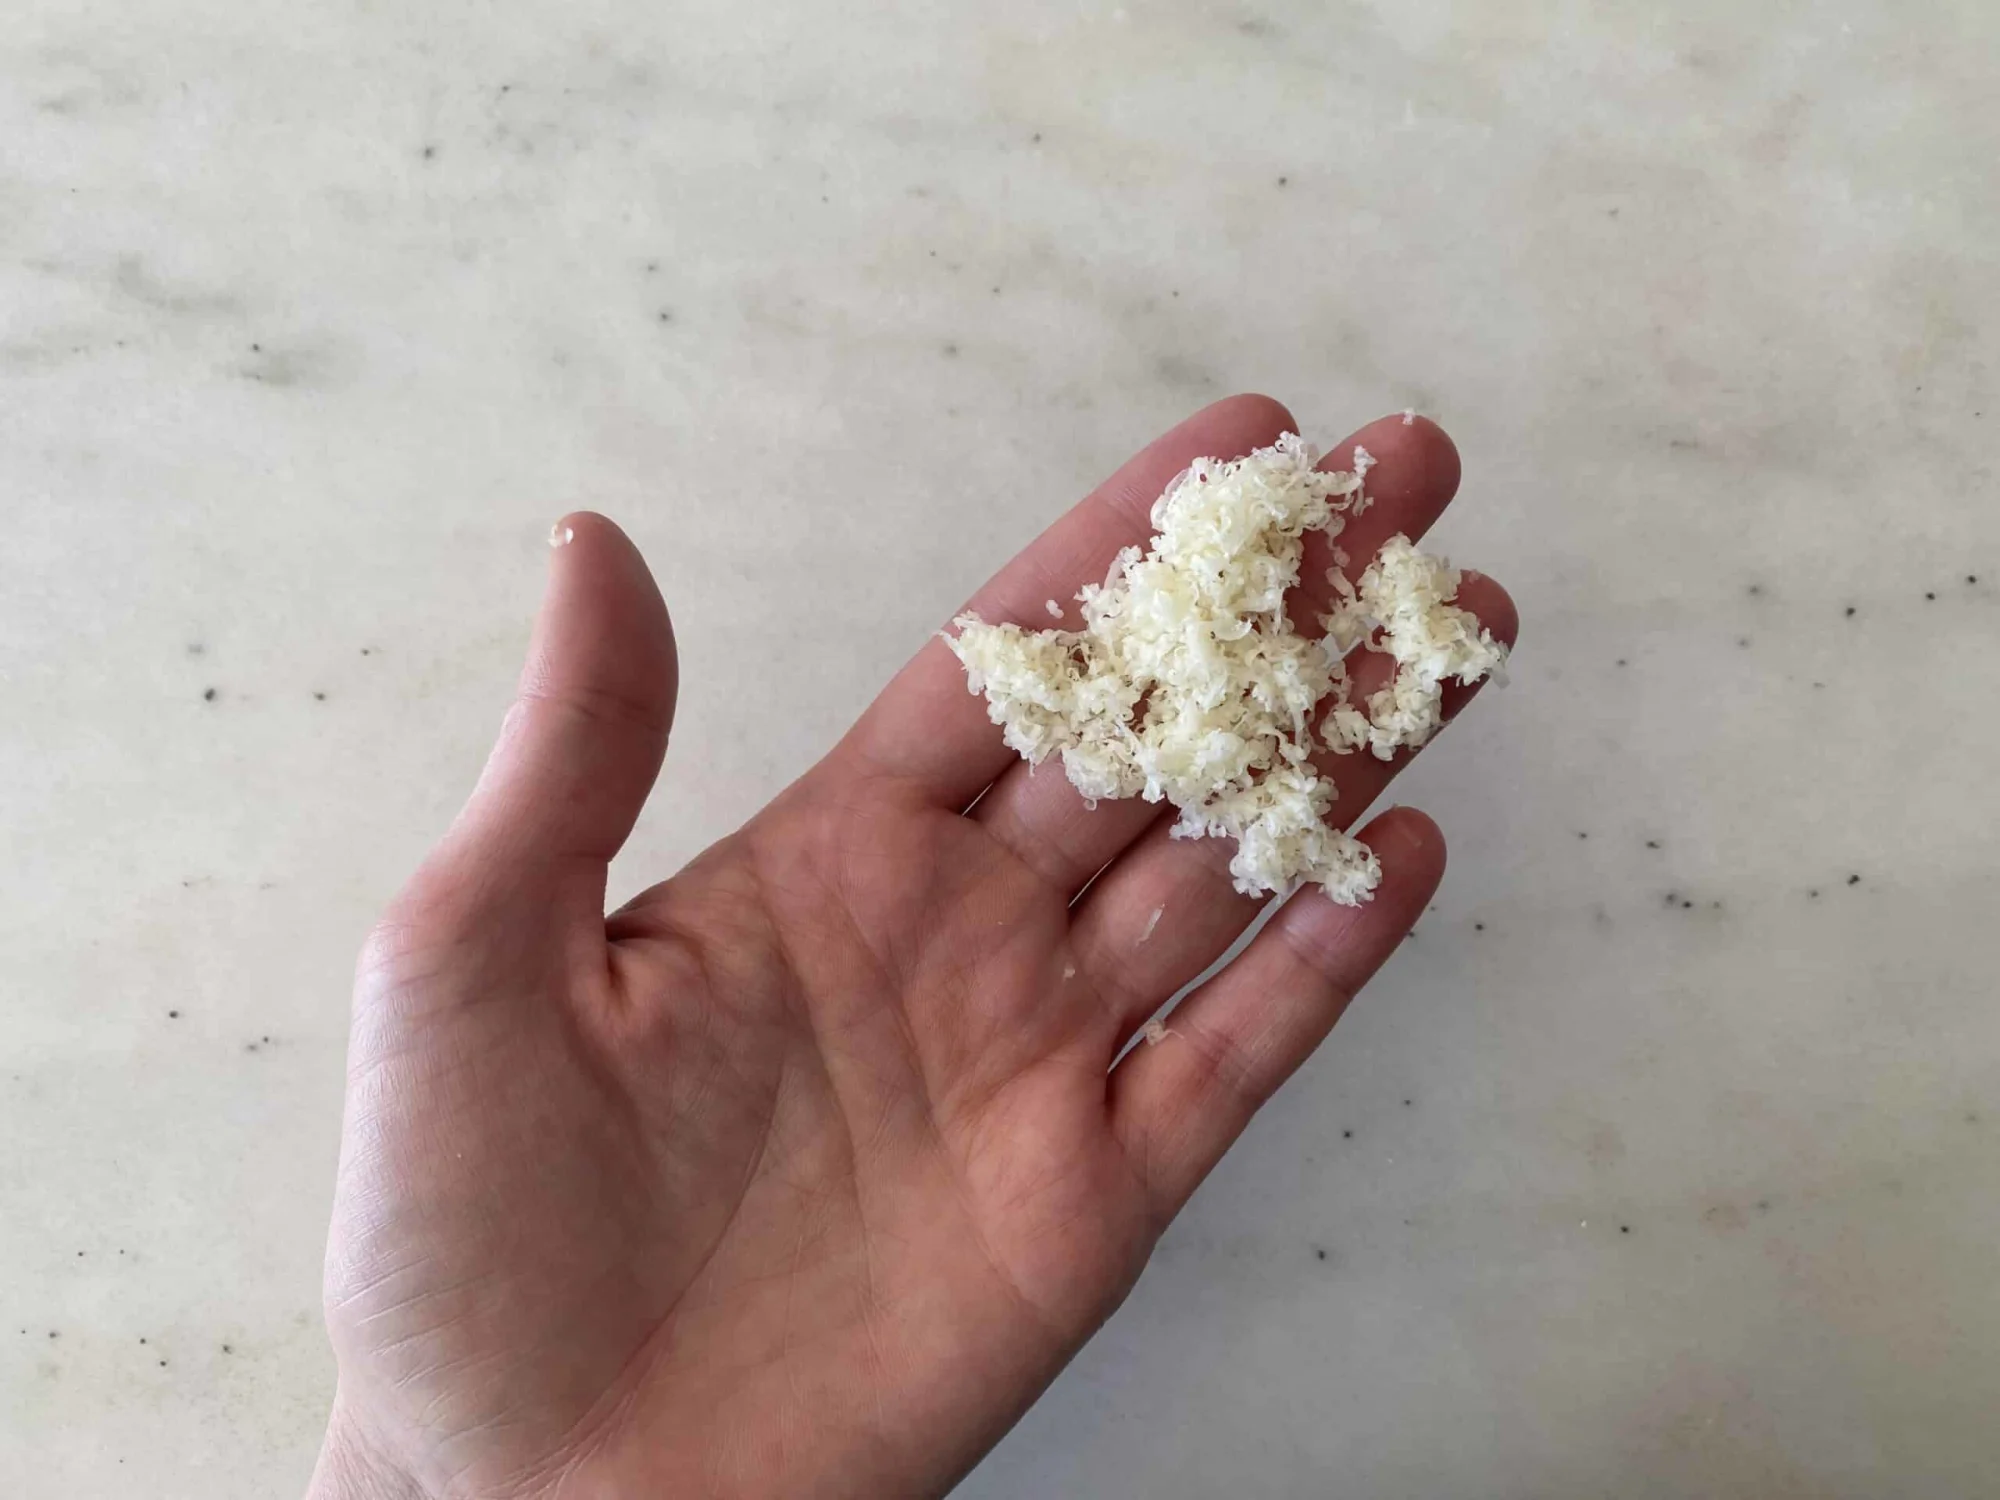 a hand holding a small clump of grated parmesan cheese for toddlers 12 mos+